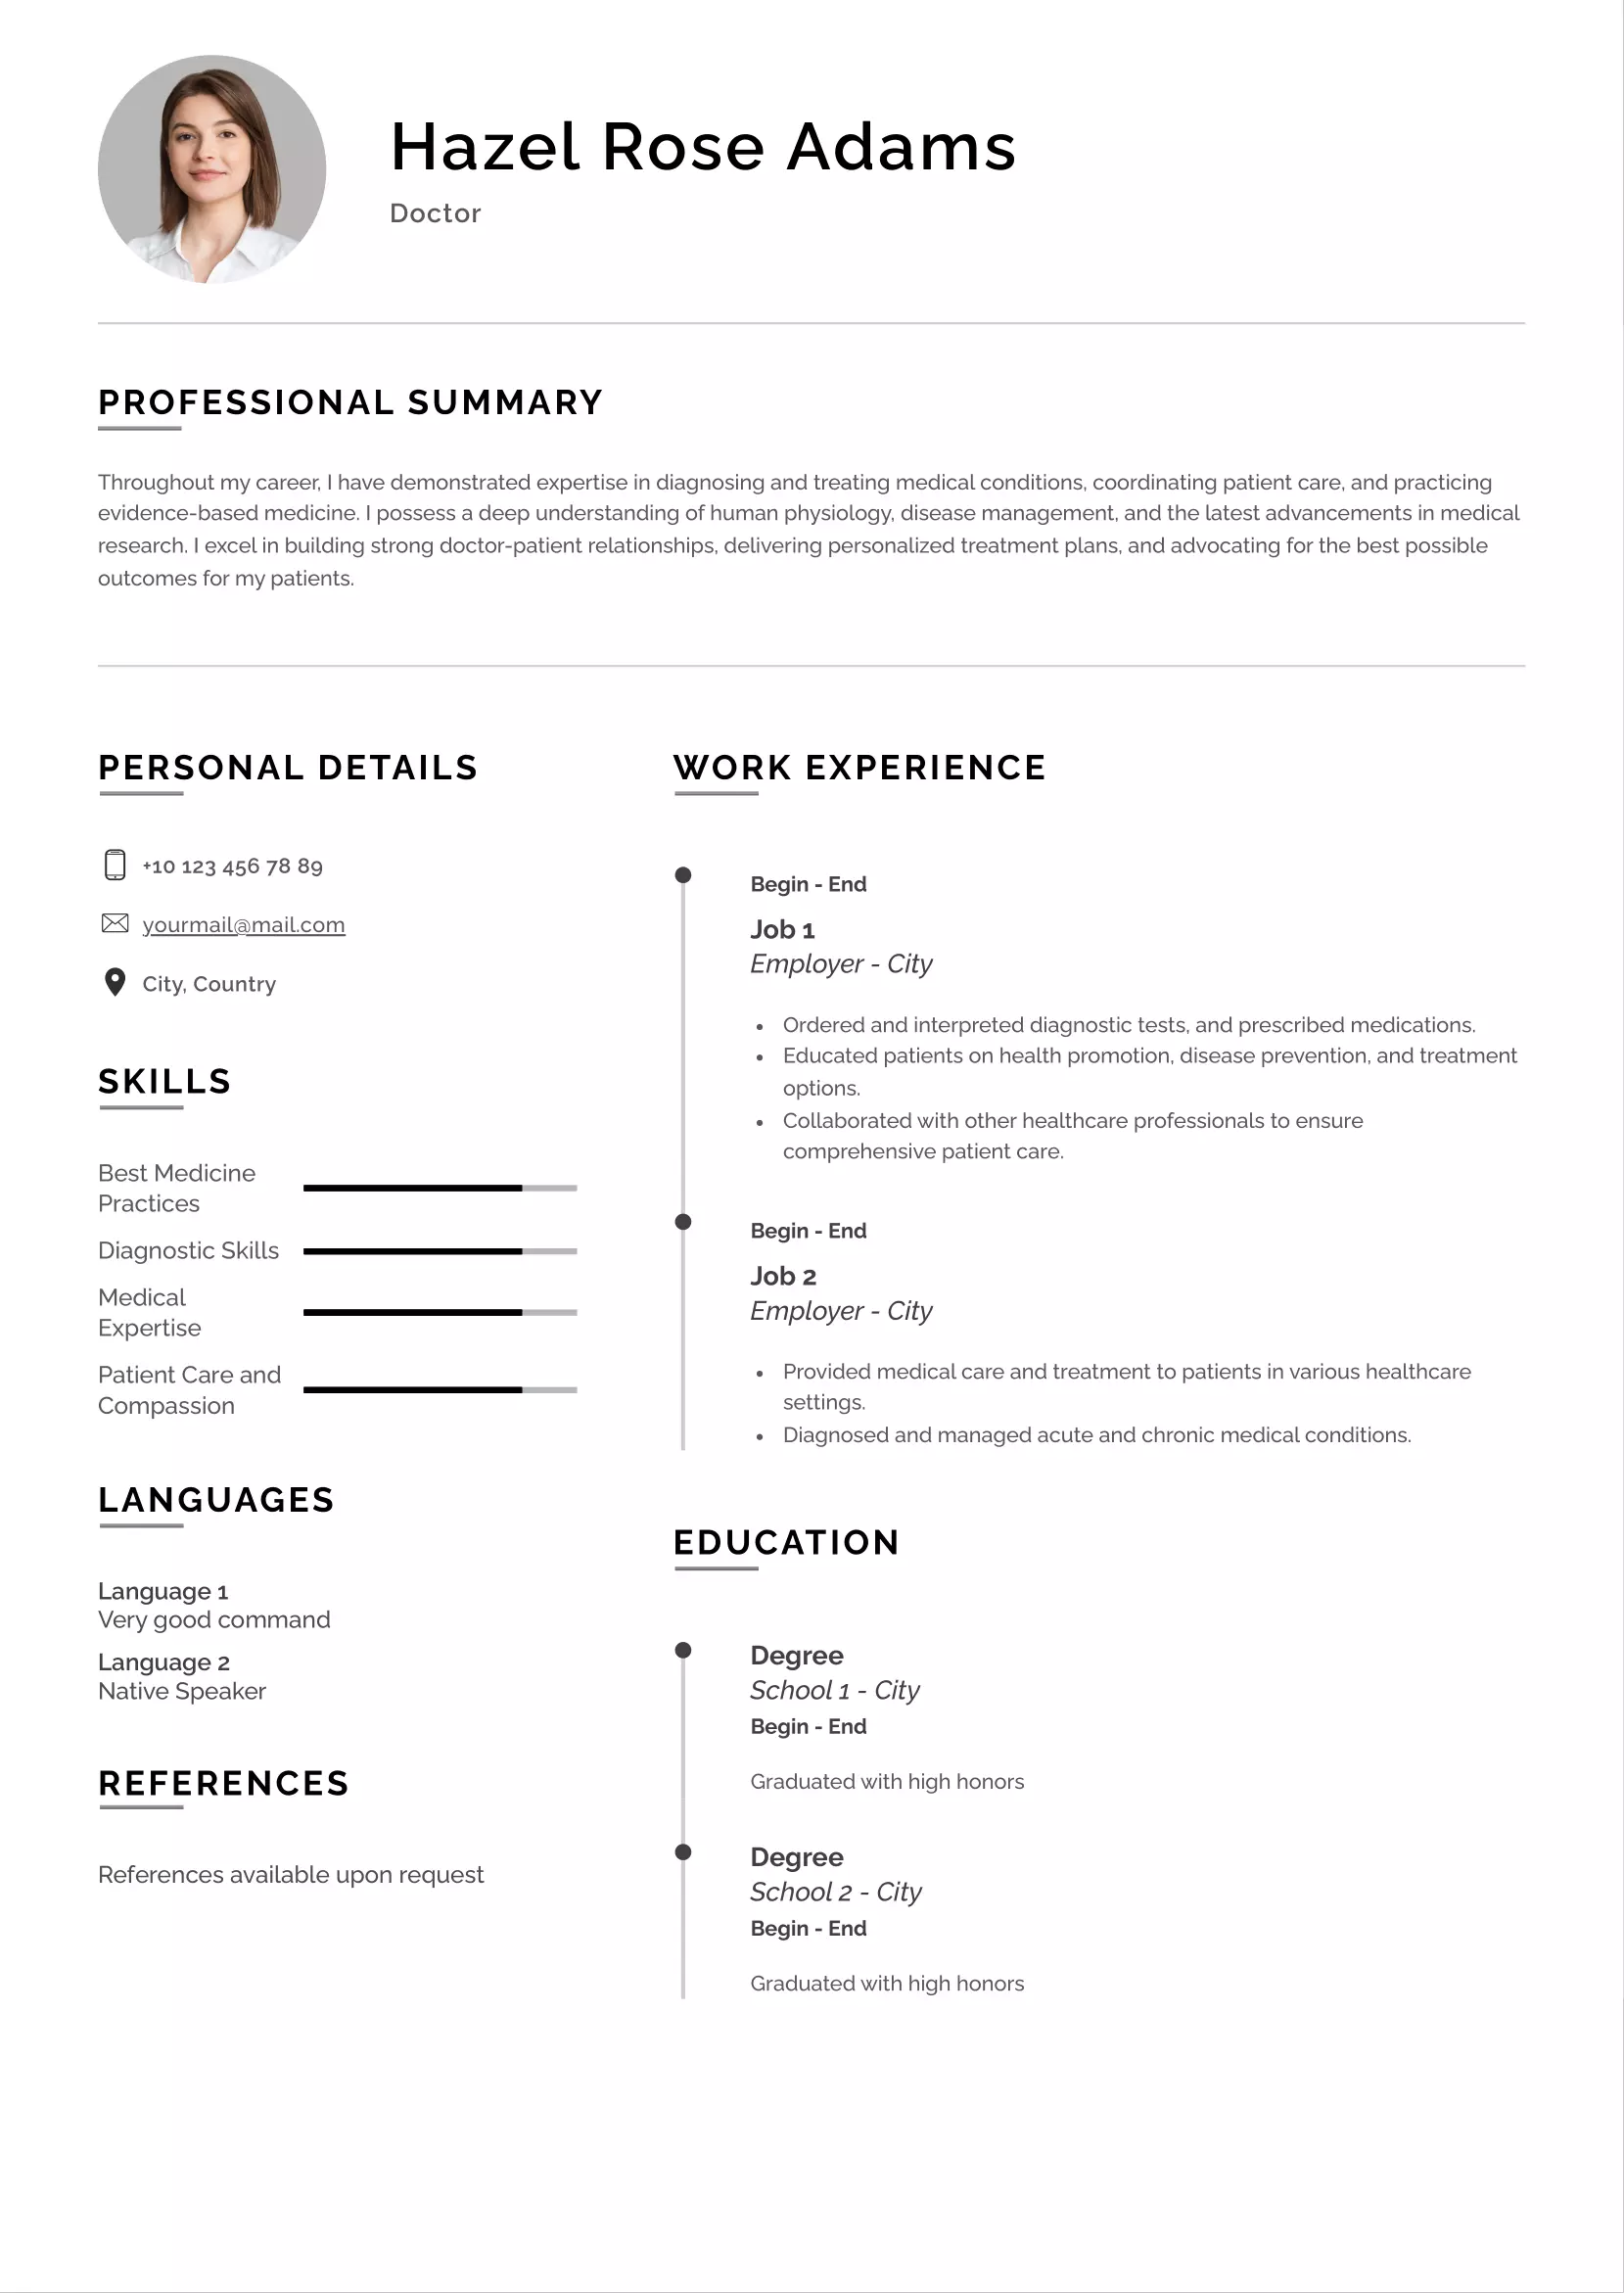 Doctor resume CV examples